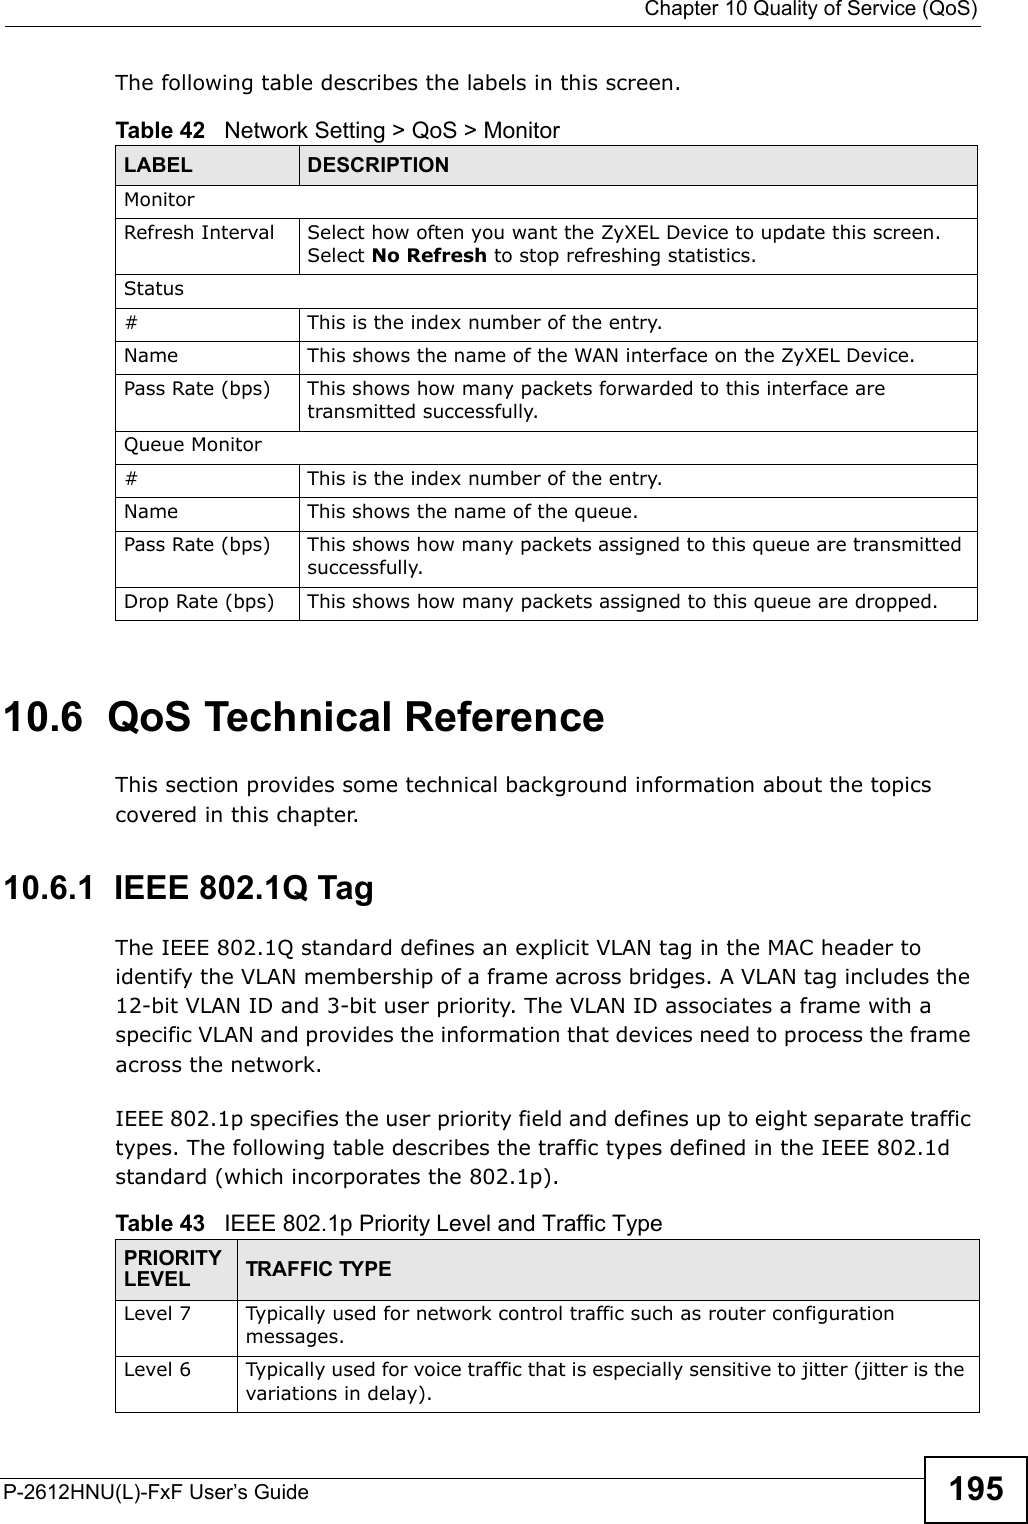  Chapter 10 Quality of Service (QoS)P-2612HNU(L)-FxF User’s Guide 195The following table describes the labels in this screen.   10.6  QoS Technical ReferenceThis section provides some technical background information about the topics covered in this chapter.10.6.1  IEEE 802.1Q TagThe IEEE 802.1Q standard defines an explicit VLAN tag in the MAC header to identify the VLAN membership of a frame across bridges. A VLAN tag includes the 12-bit VLAN ID and 3-bit user priority. The VLAN ID associates a frame with a specific VLAN and provides the information that devices need to process the frame across the network.IEEE 802.1p specifies the user priority field and defines up to eight separate traffic types. The following table describes the traffic types defined in the IEEE 802.1dstandard (which incorporates the 802.1p).Table 42   Network Setting &gt; QoS &gt; MonitorLABEL DESCRIPTIONMonitorRefresh Interval Select how often you want the ZyXEL Device to update this screen. Select No Refresh to stop refreshing statistics.Status# This is the index number of the entry.Name This shows the name of the WAN interface on the ZyXEL Device. Pass Rate (bps) This shows how many packets forwarded to this interface aretransmitted successfully.Queue Monitor# This is the index number of the entry.Name This shows the name of the queue.Pass Rate (bps) This shows how many packets assigned to this queue are transmitted successfully.Drop Rate (bps) This shows how many packets assigned to this queue are dropped.Table 43   IEEE 802.1p Priority Level and Traffic TypePRIORITY LEVEL TRAFFIC TYPELevel 7 Typically used for network control traffic such as router configuration messages.Level 6 Typically used for voice traffic that is especially sensitive to jitter (jitter is thevariations in delay).